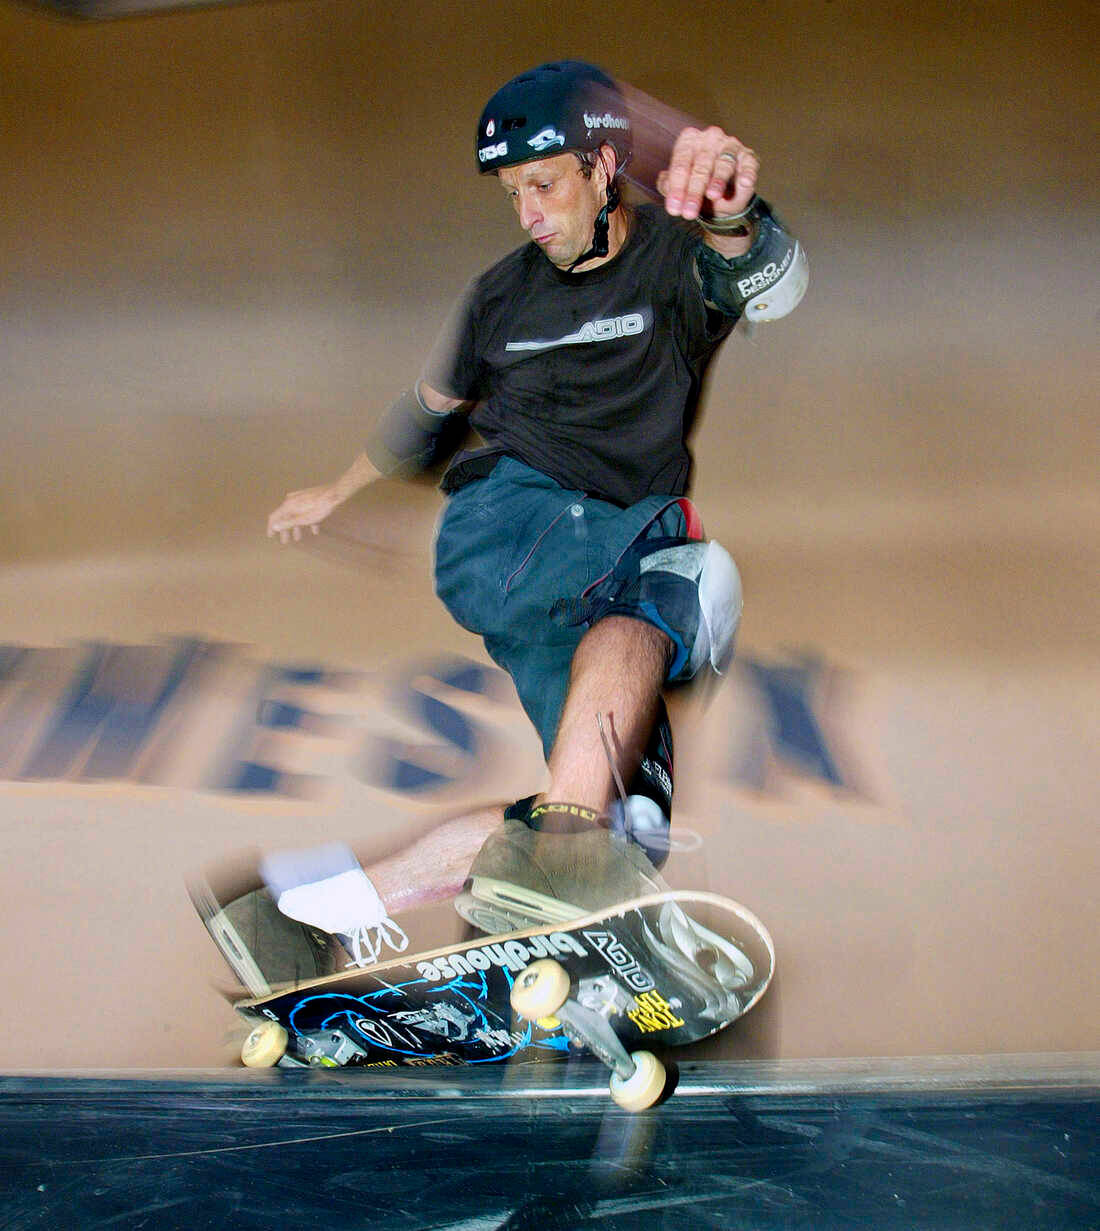 360 Spin Skateboarding Picture